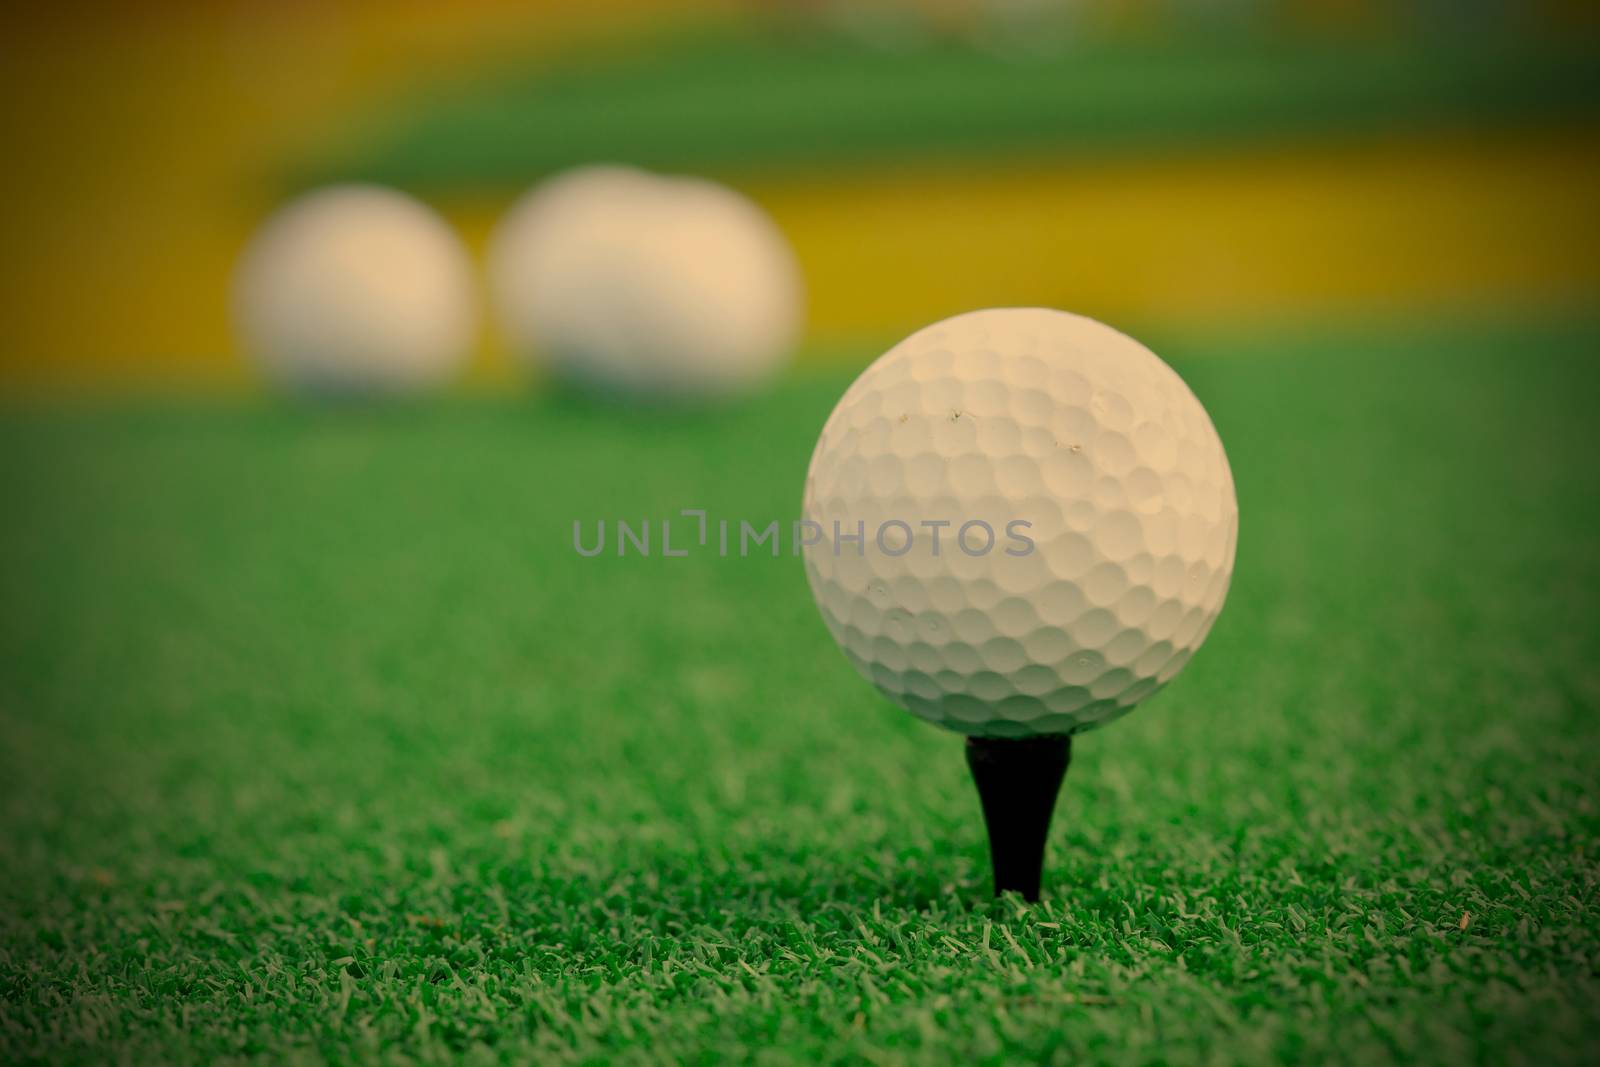 Golf ball. Playing golf, instagram image style